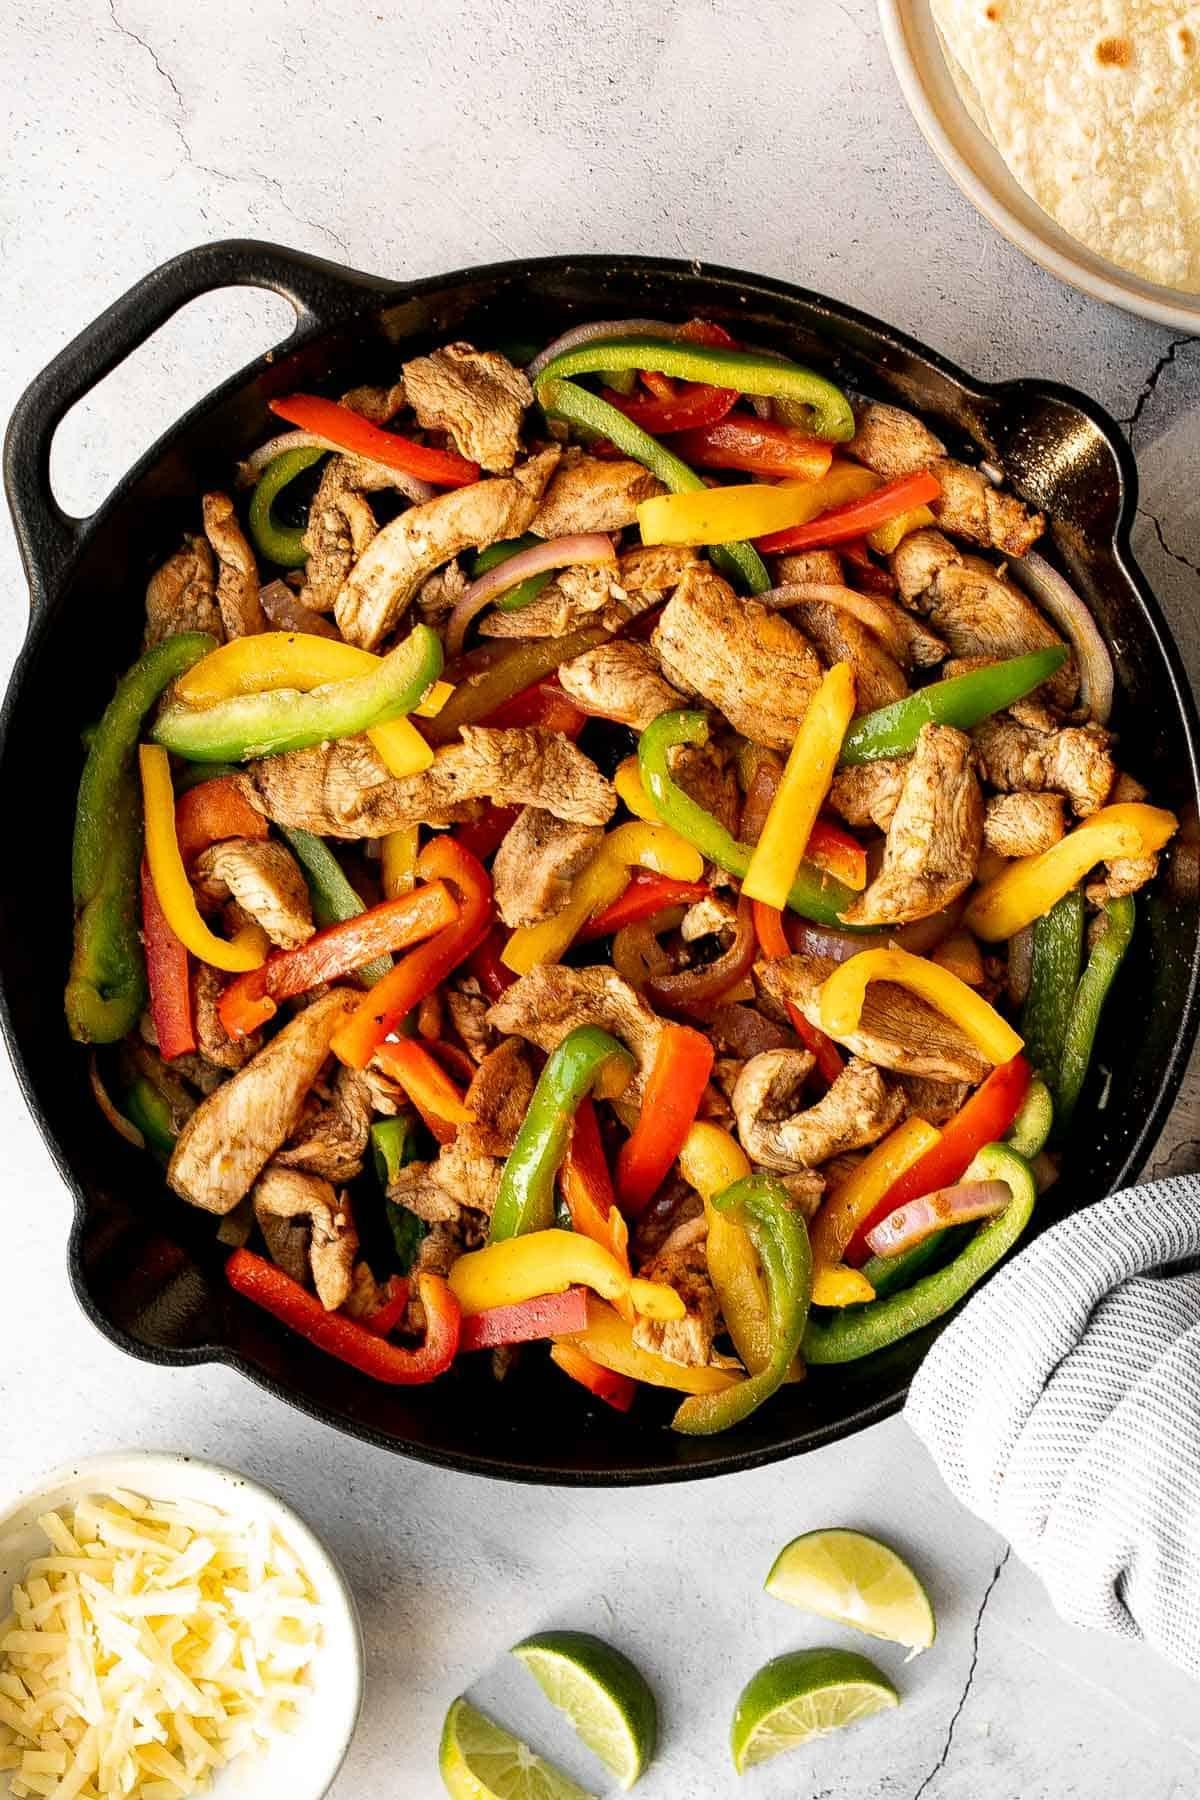 Sizzling Skillet Fajitas: A Flavorful and Easy Weeknight Dinner Recipe